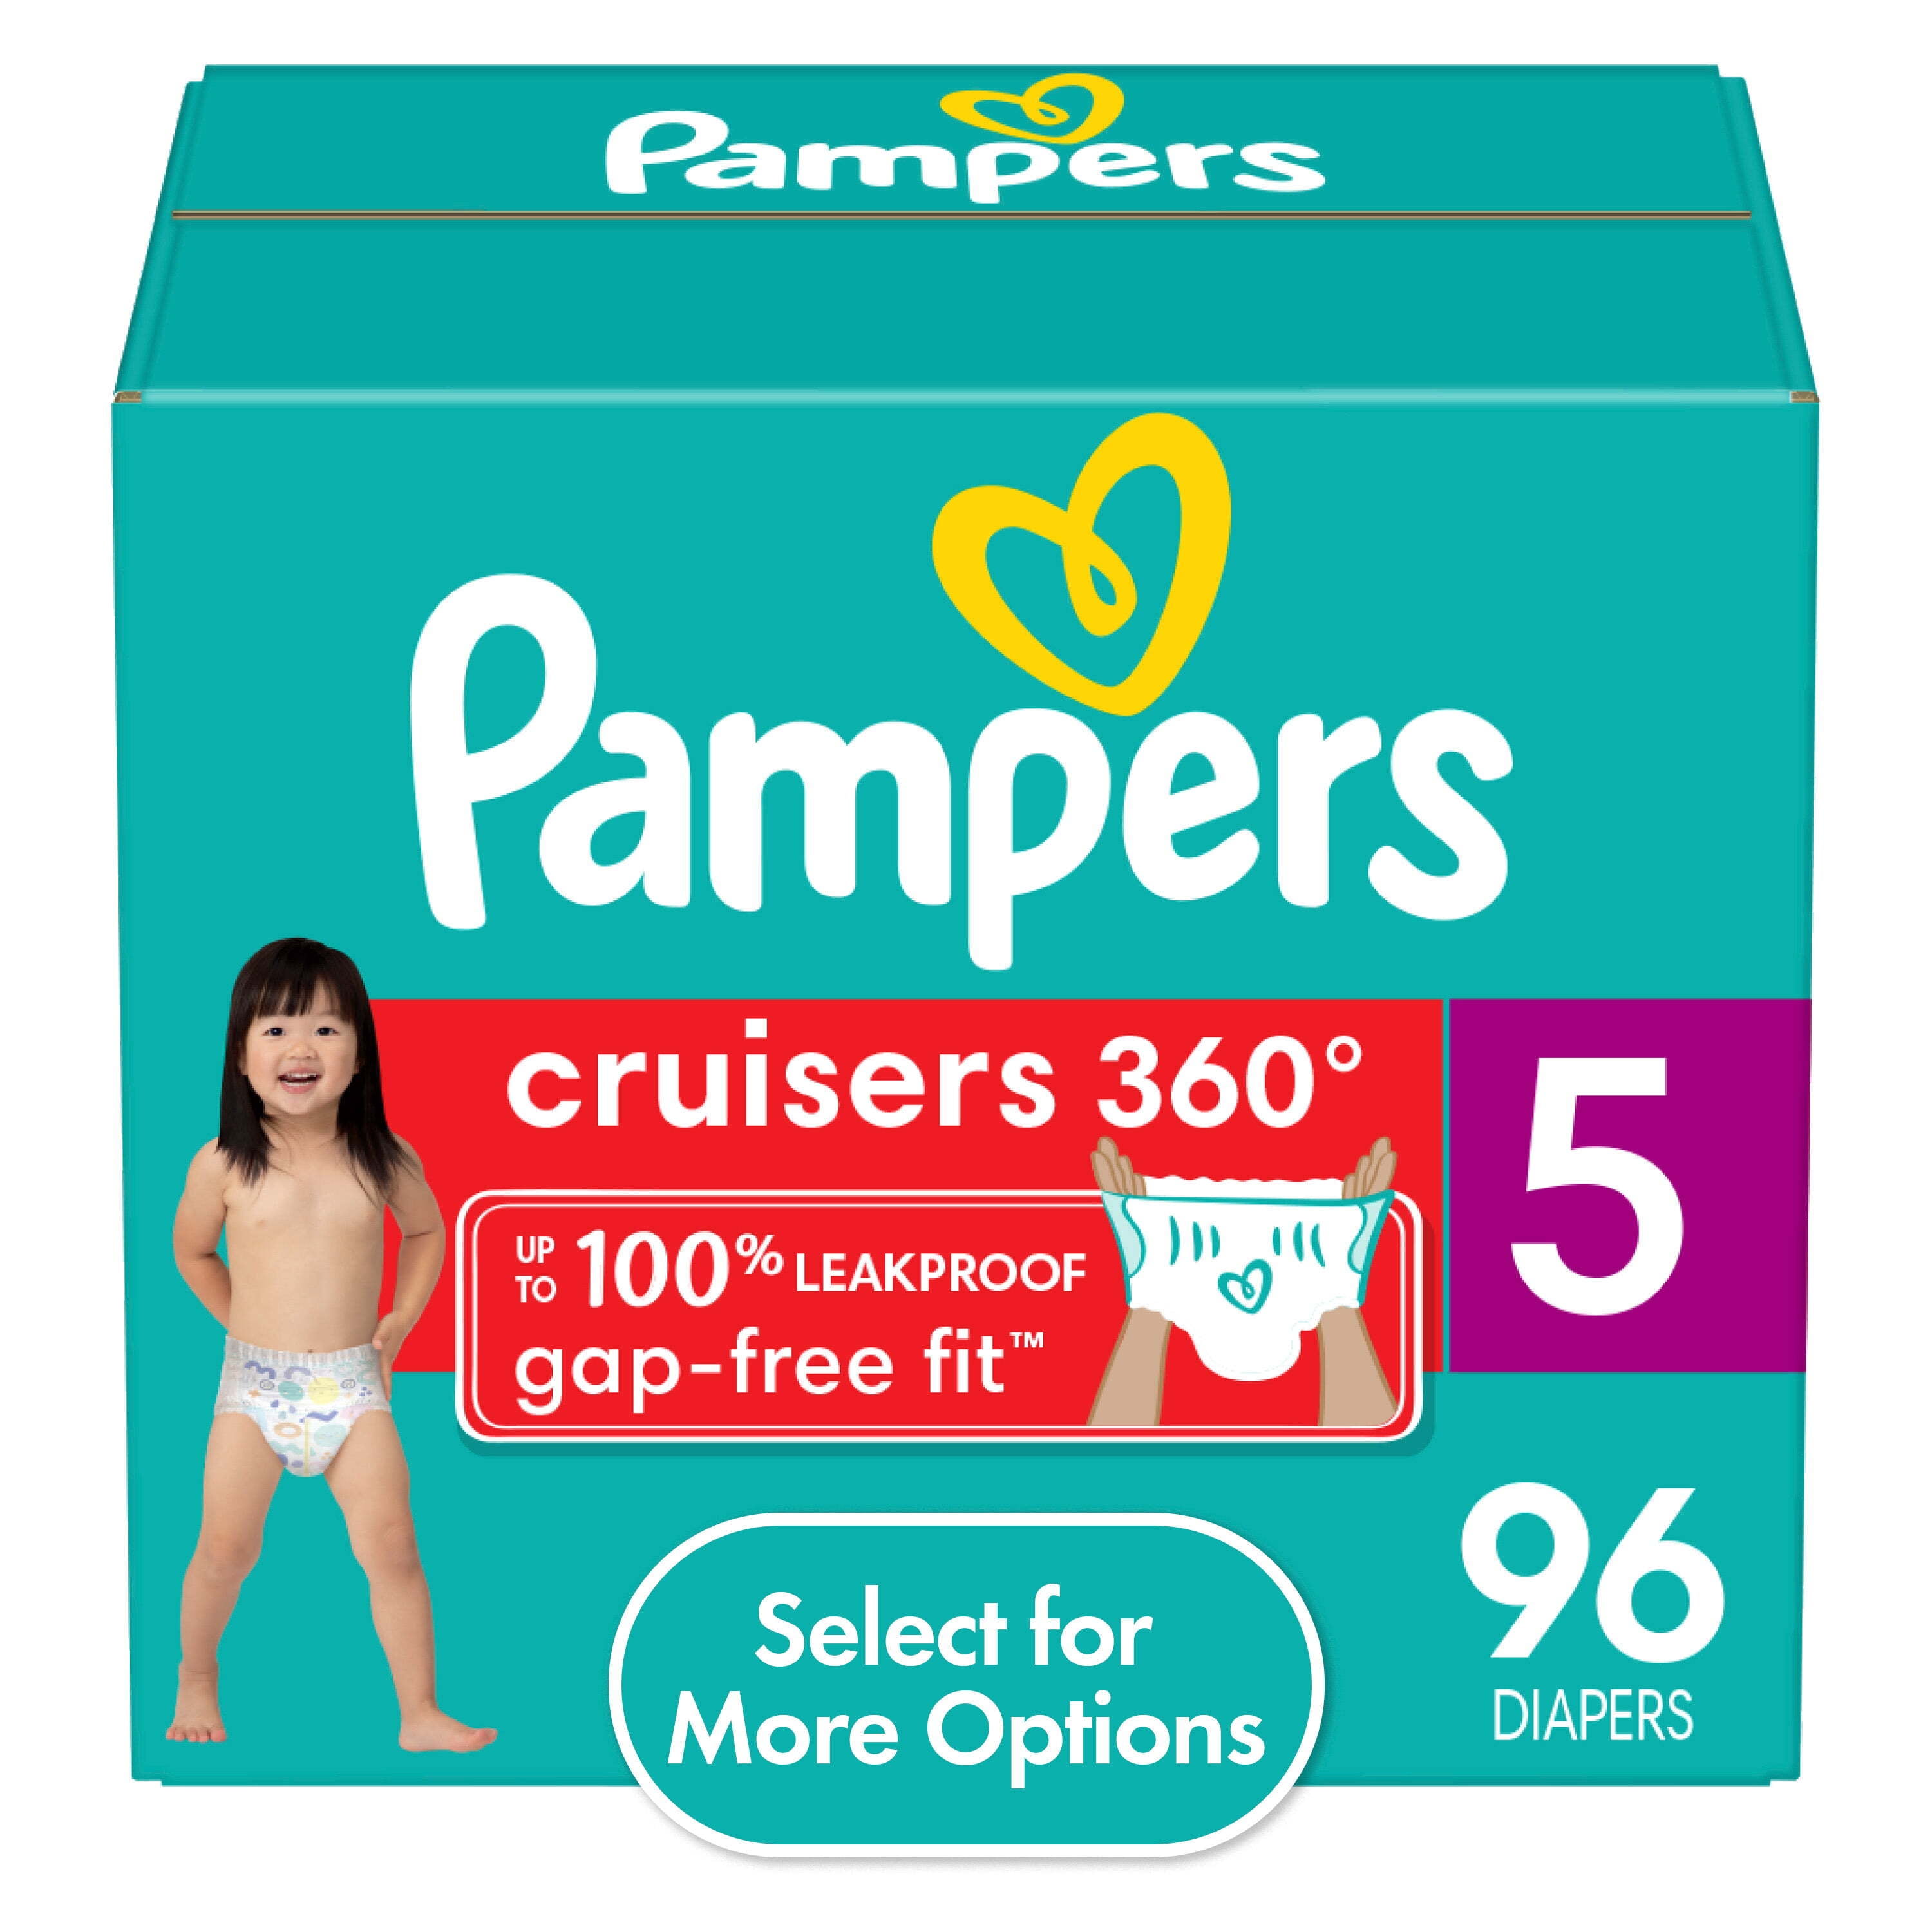 Pampers Couches-Culottes Taille 8 (19+ kg), Baby-Dry, 96 Couches